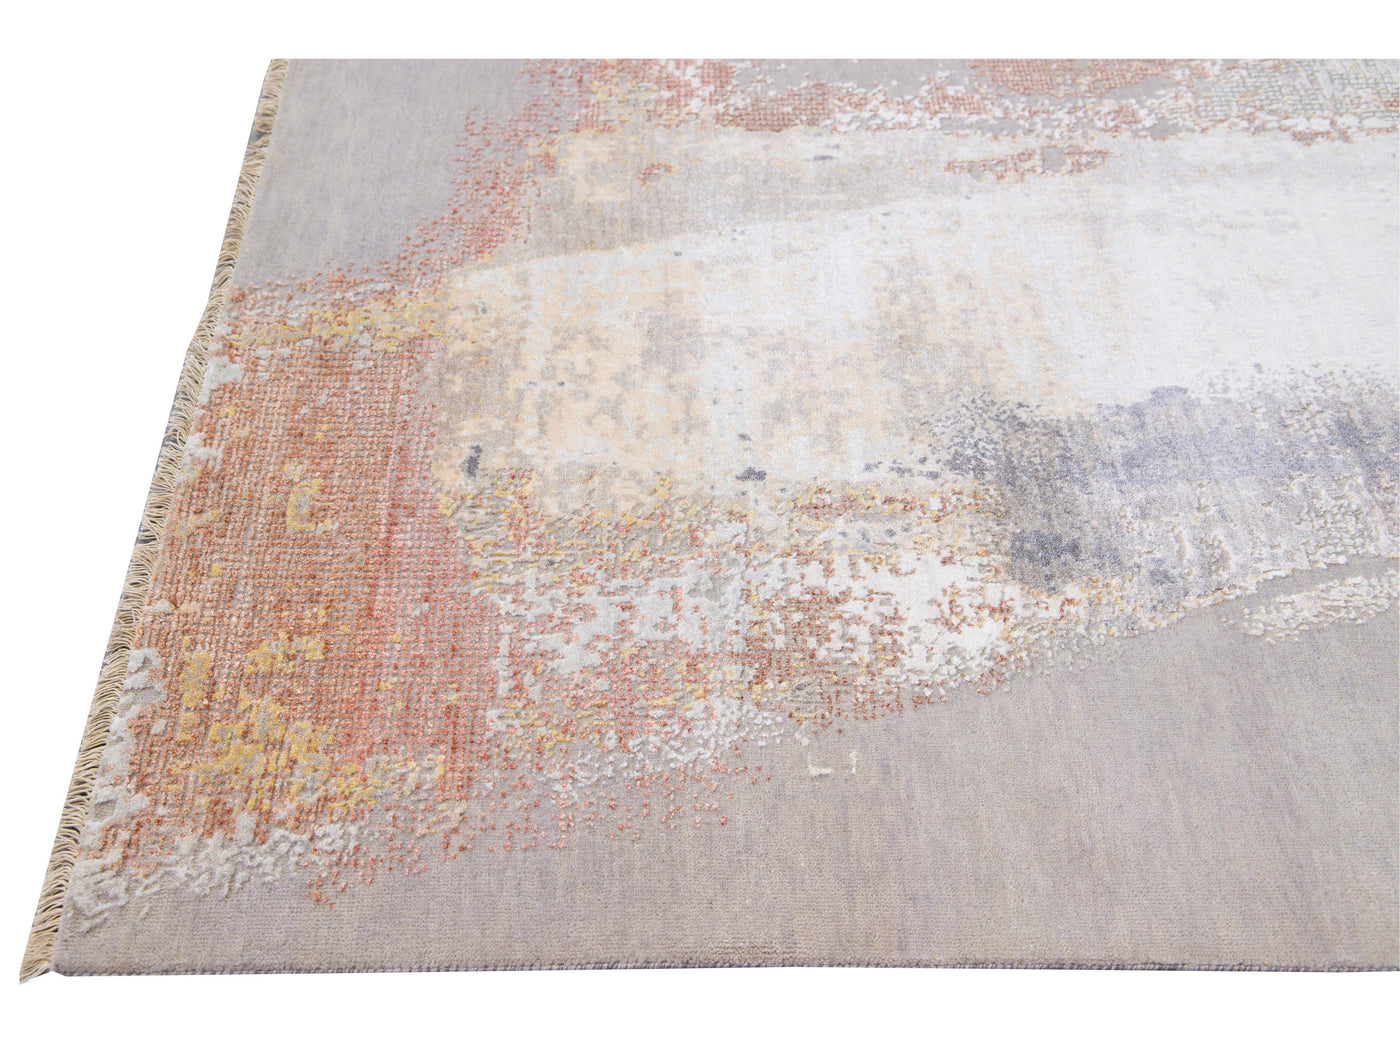 Modern Indian Handmade Beige and Gray Abstract Wool and Silk Rug